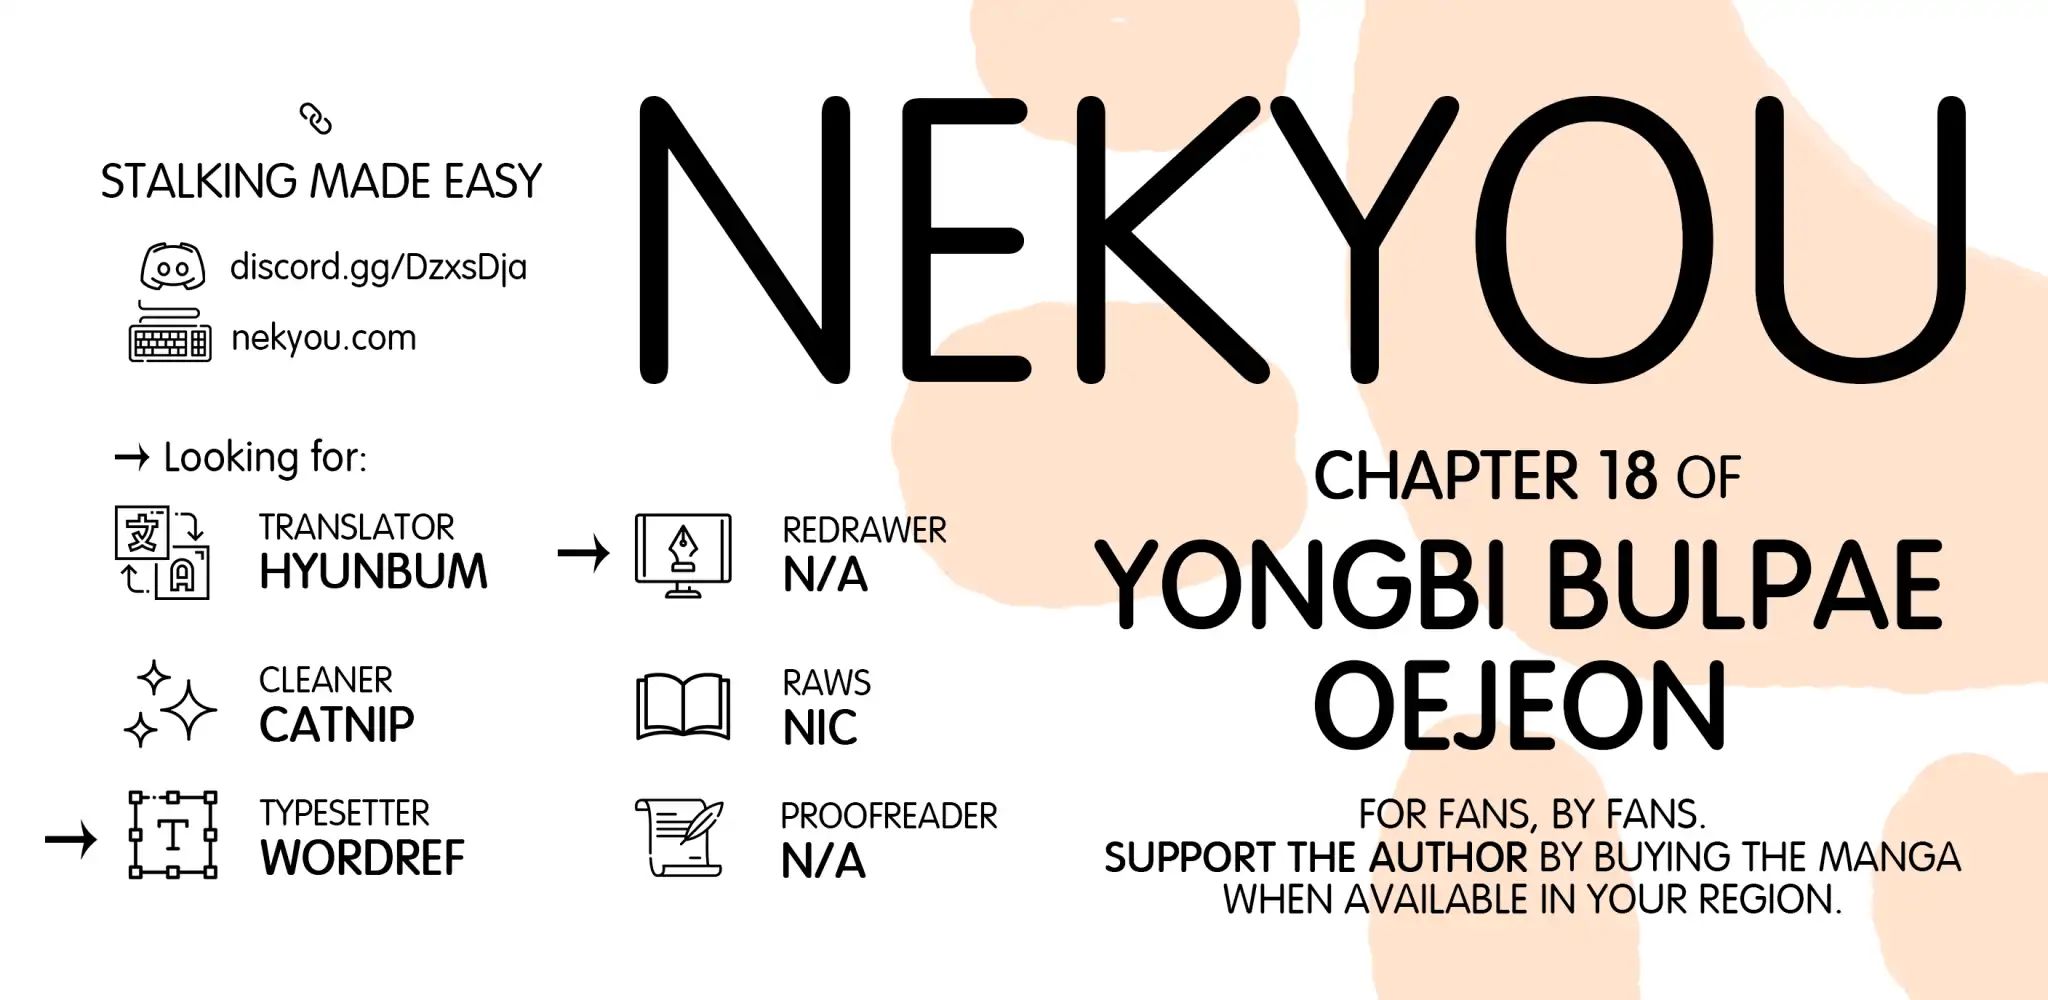 Yongbi the Invincible - A Side Story Chapter 18